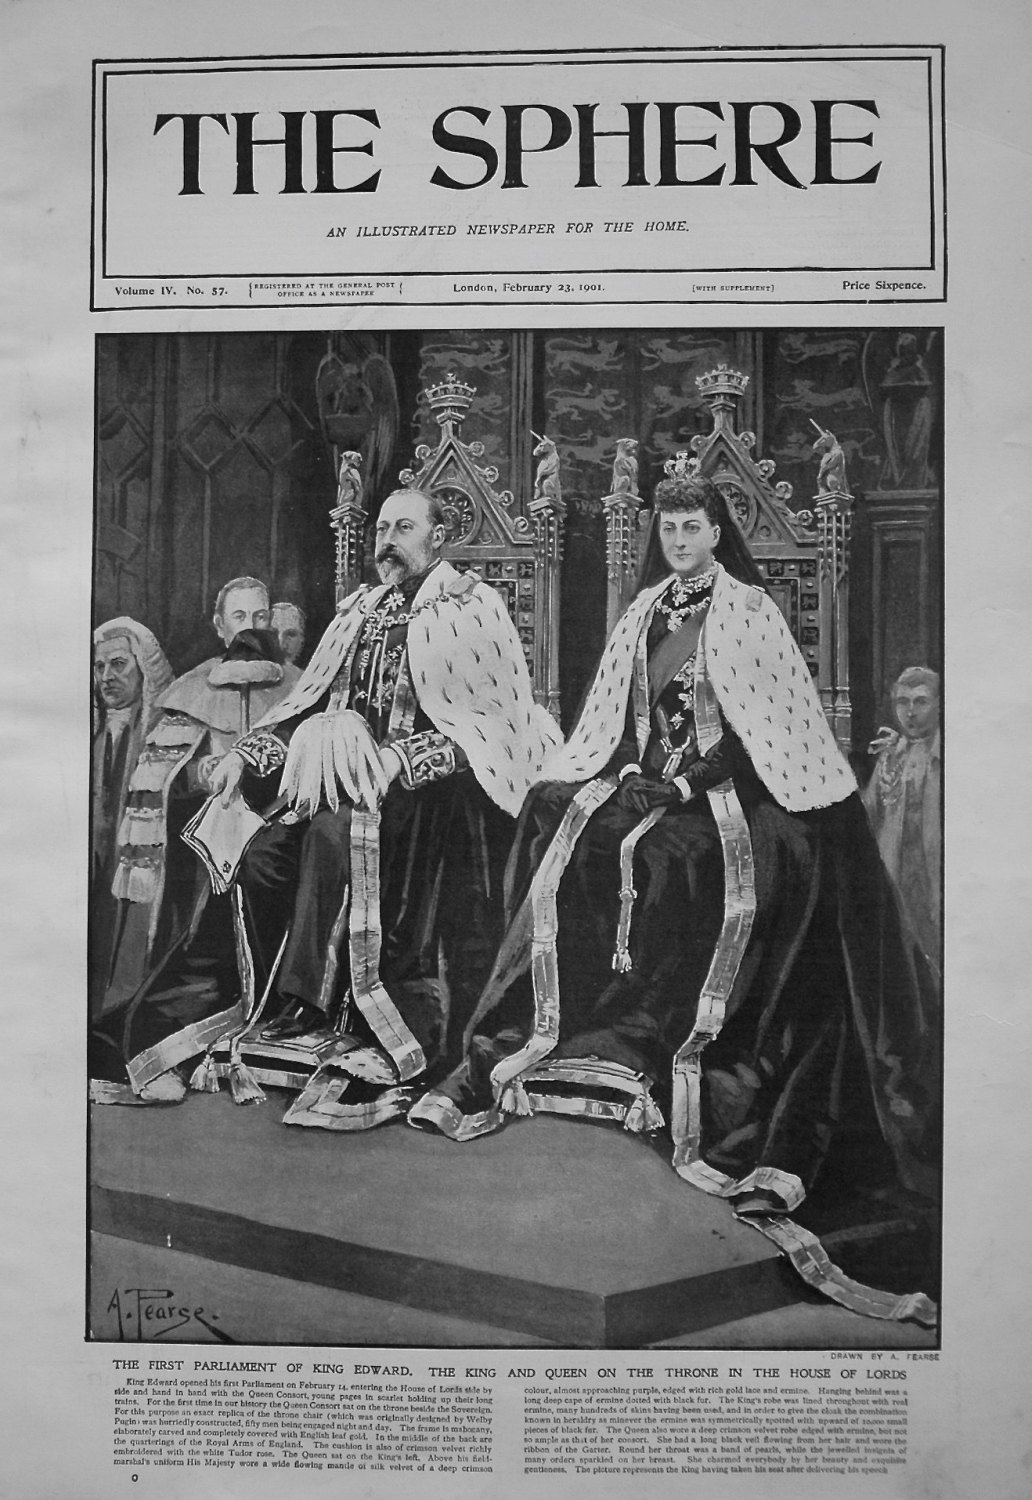 First Parliament of King Edward. The King and Queen on the Throne in the Ho